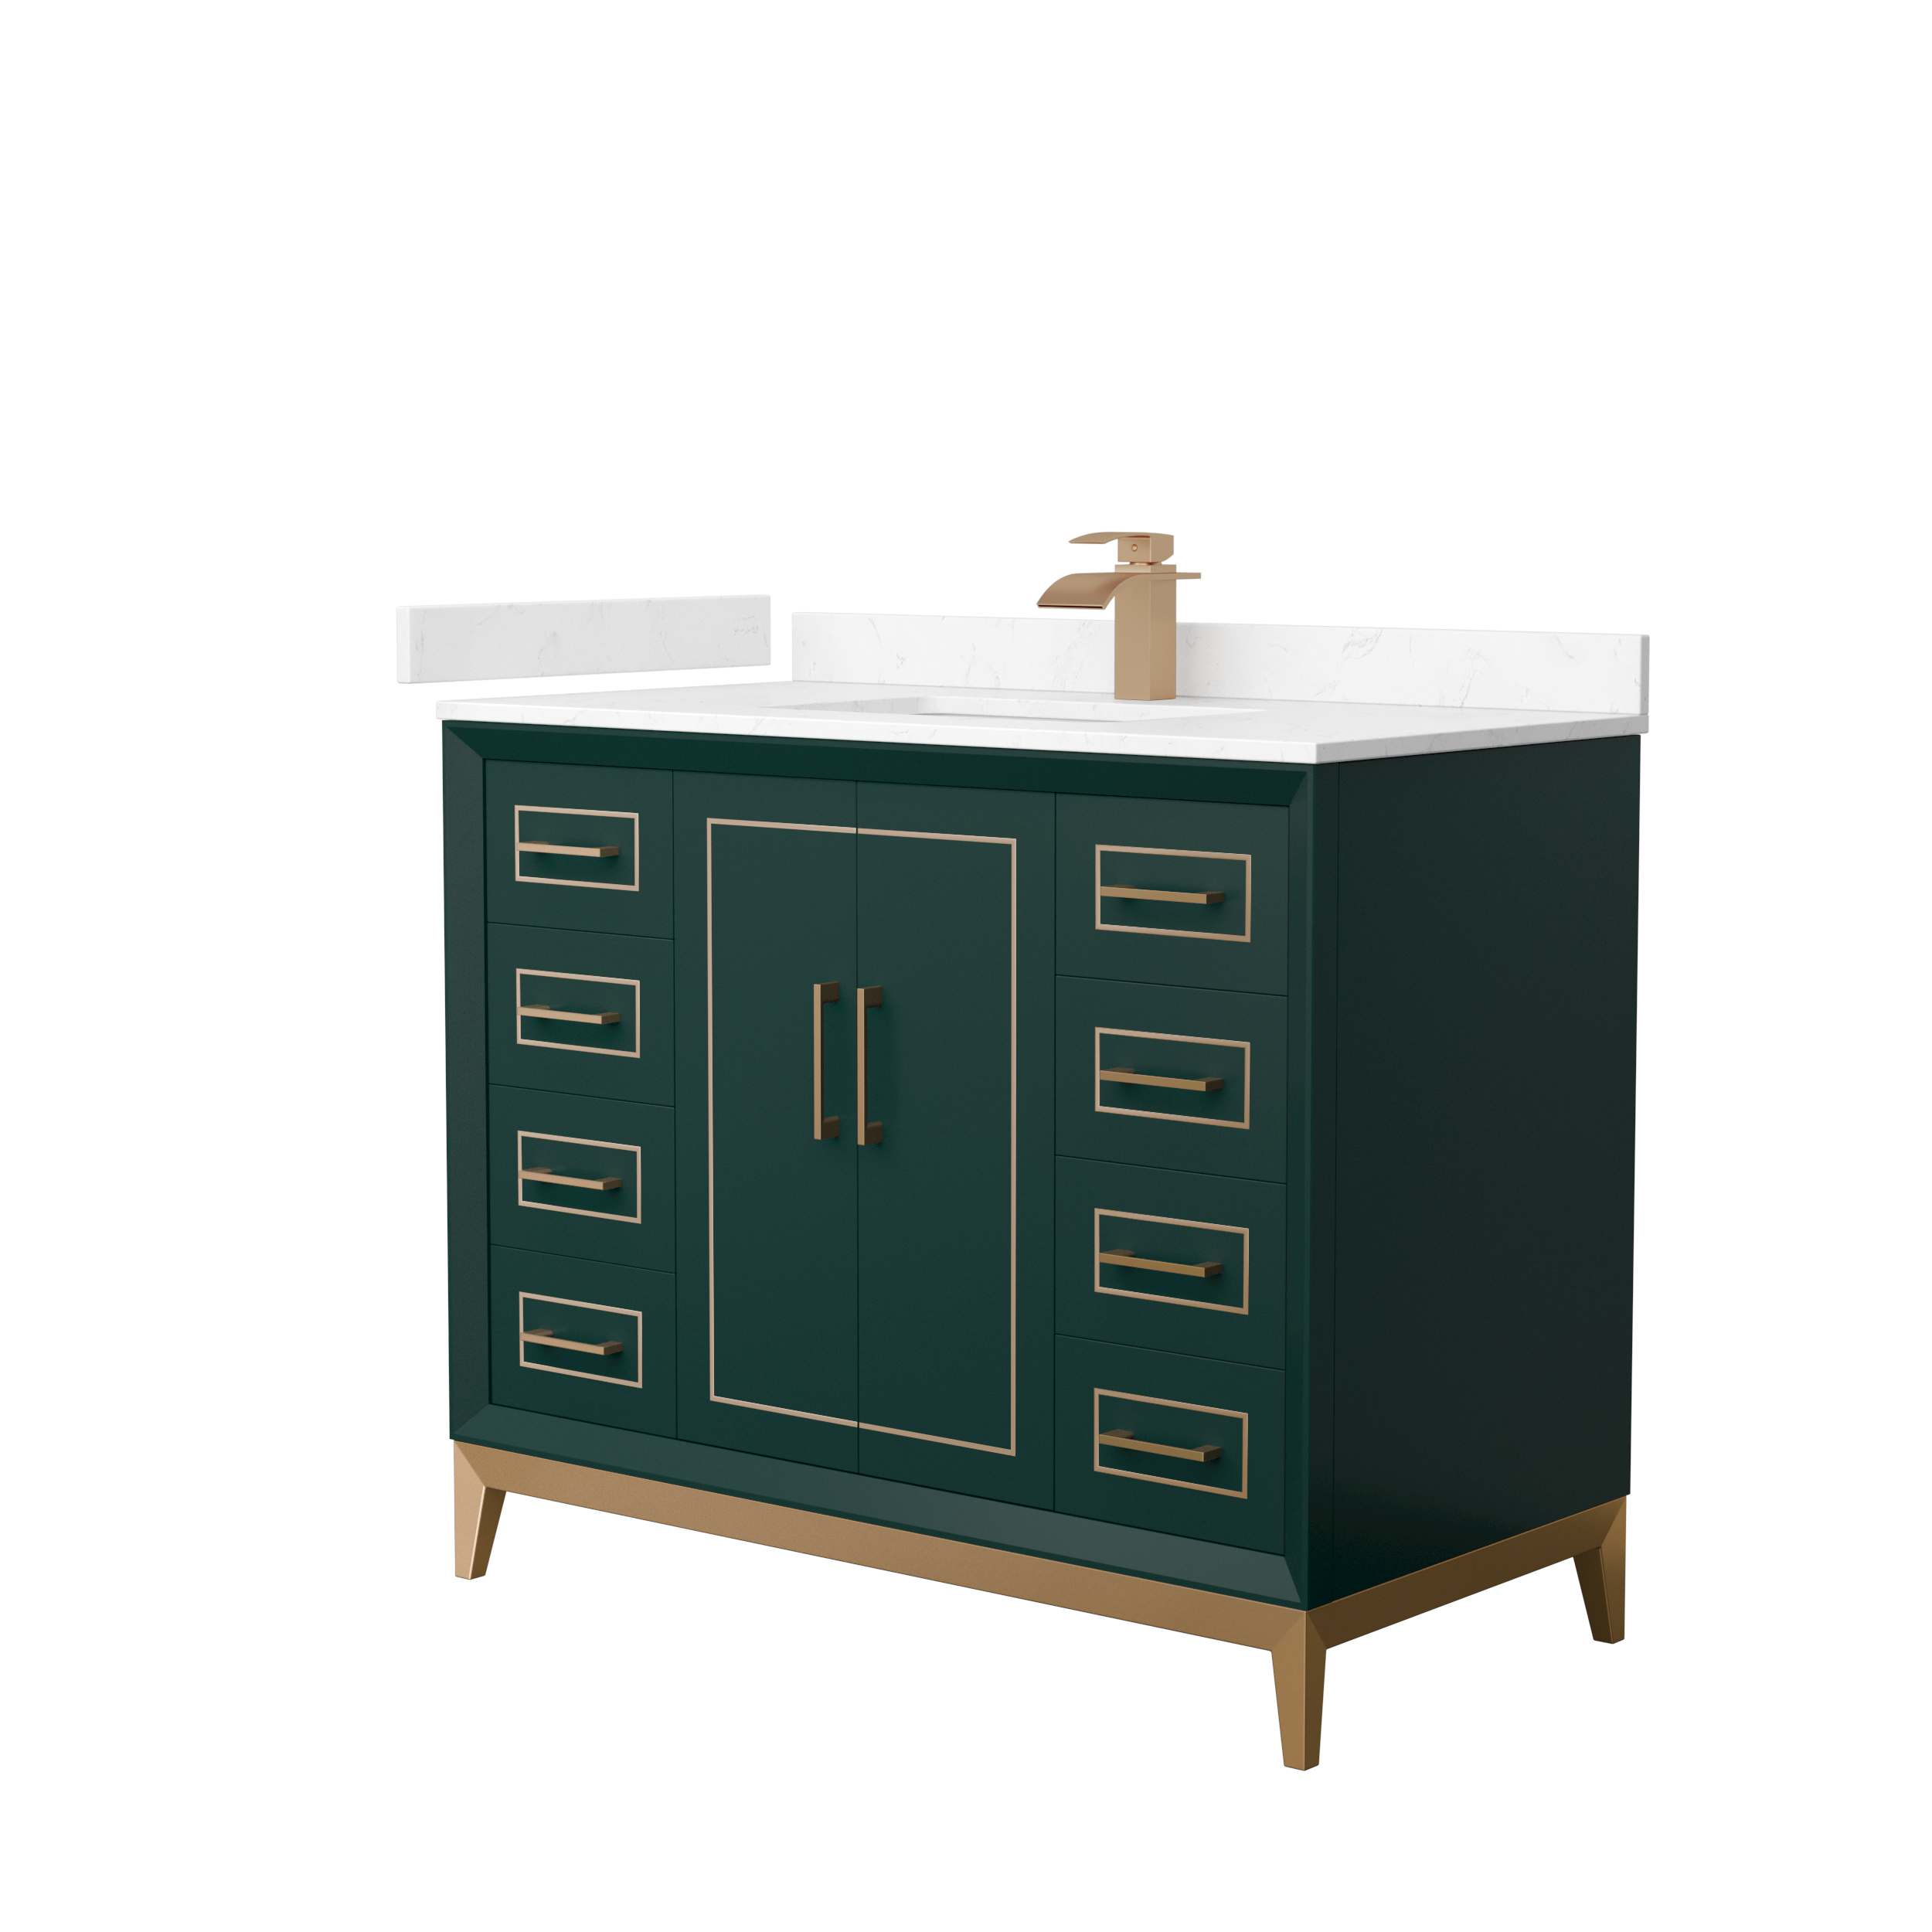 Marlena 42" Single Vanity with optional Cultured Marble Counter - Green WC-5151-42-SGL-VAN-GRN-